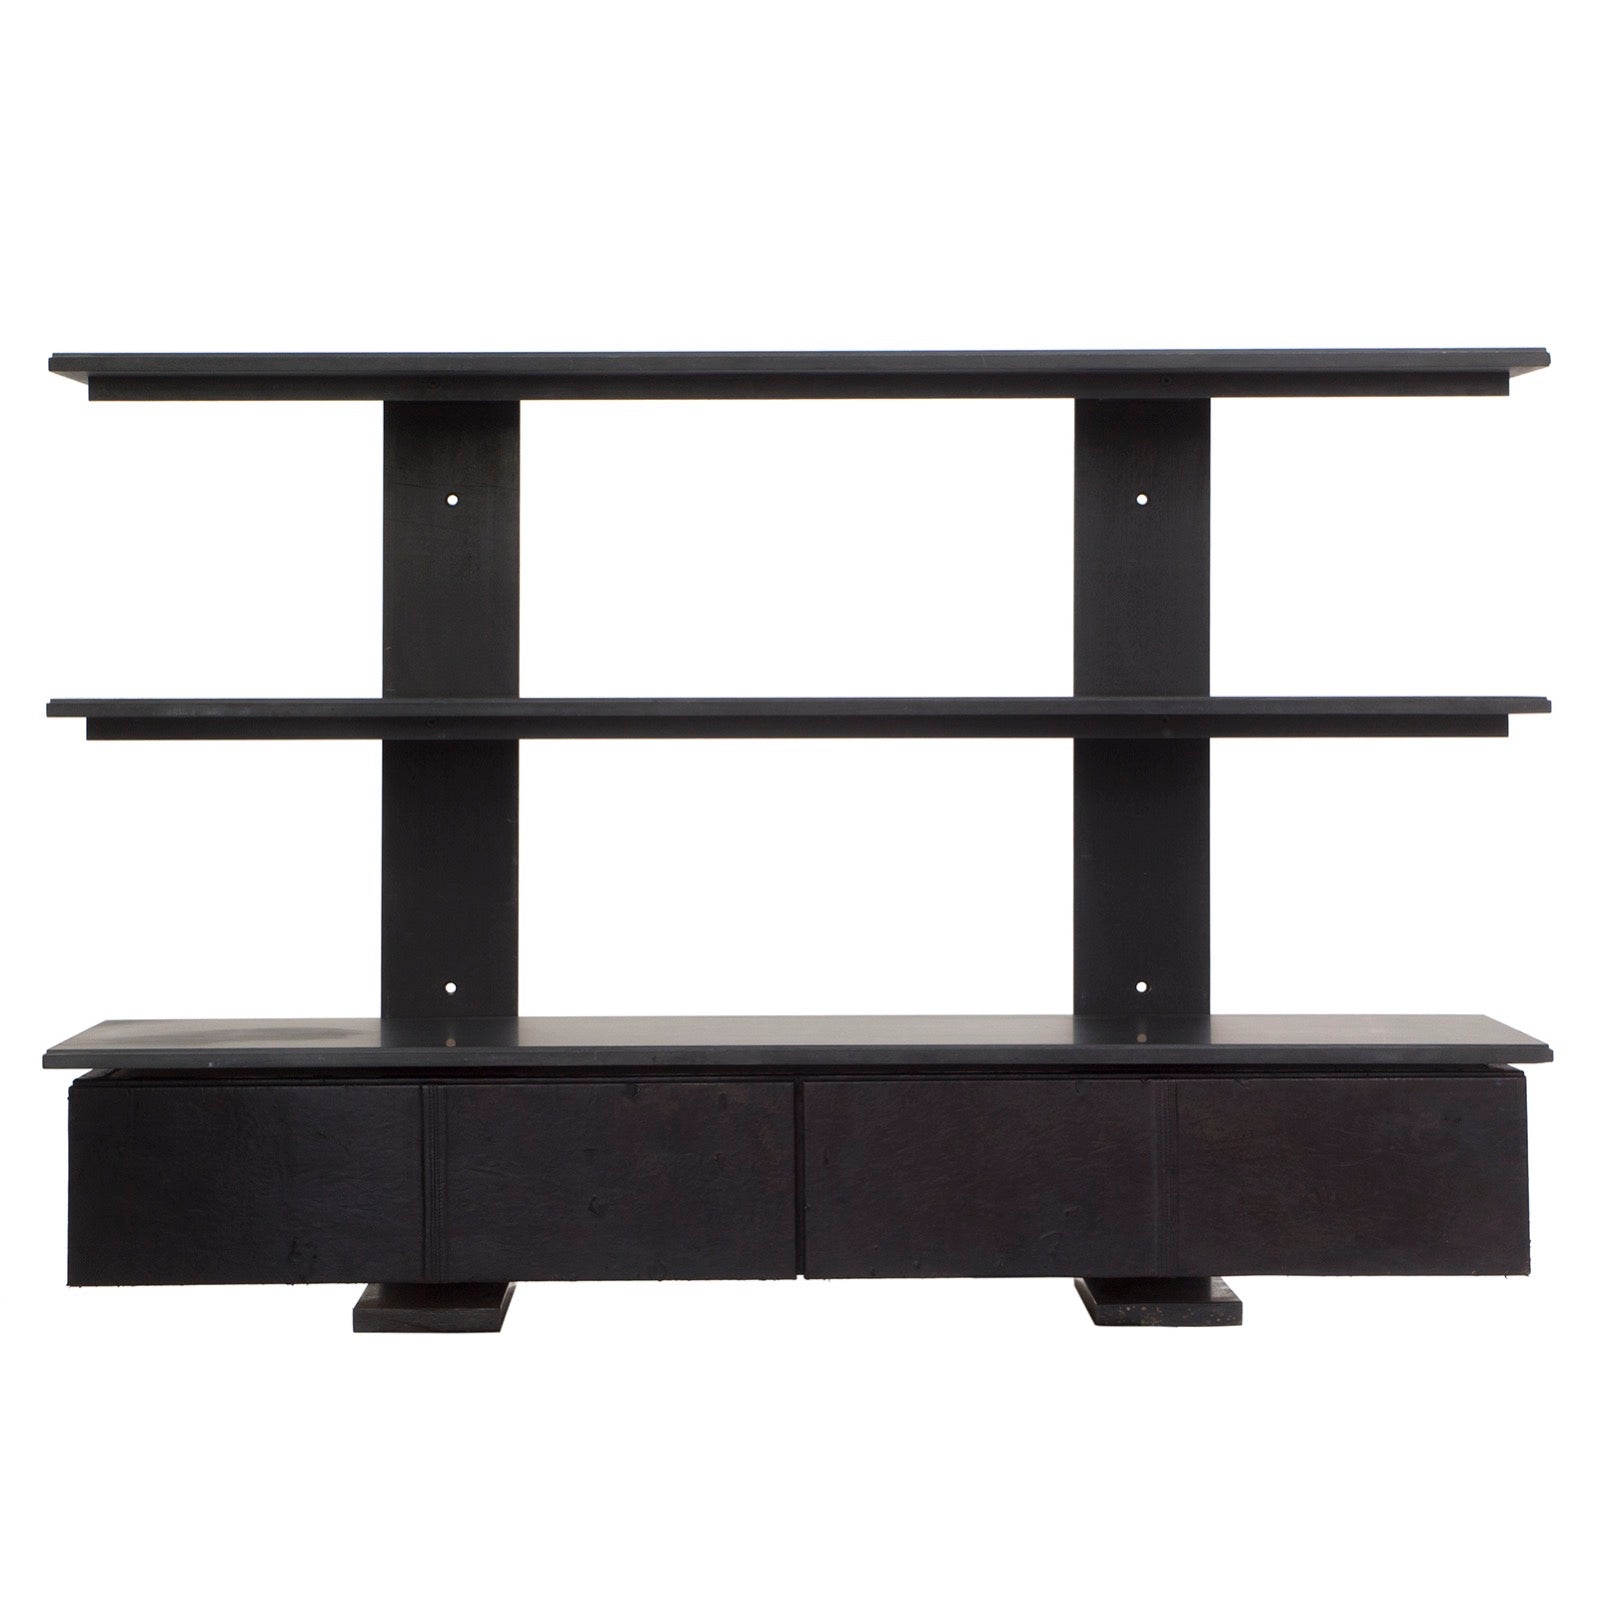 Steel Frame Cantilevered Shelves with drawer cabinets. by American Custom Made